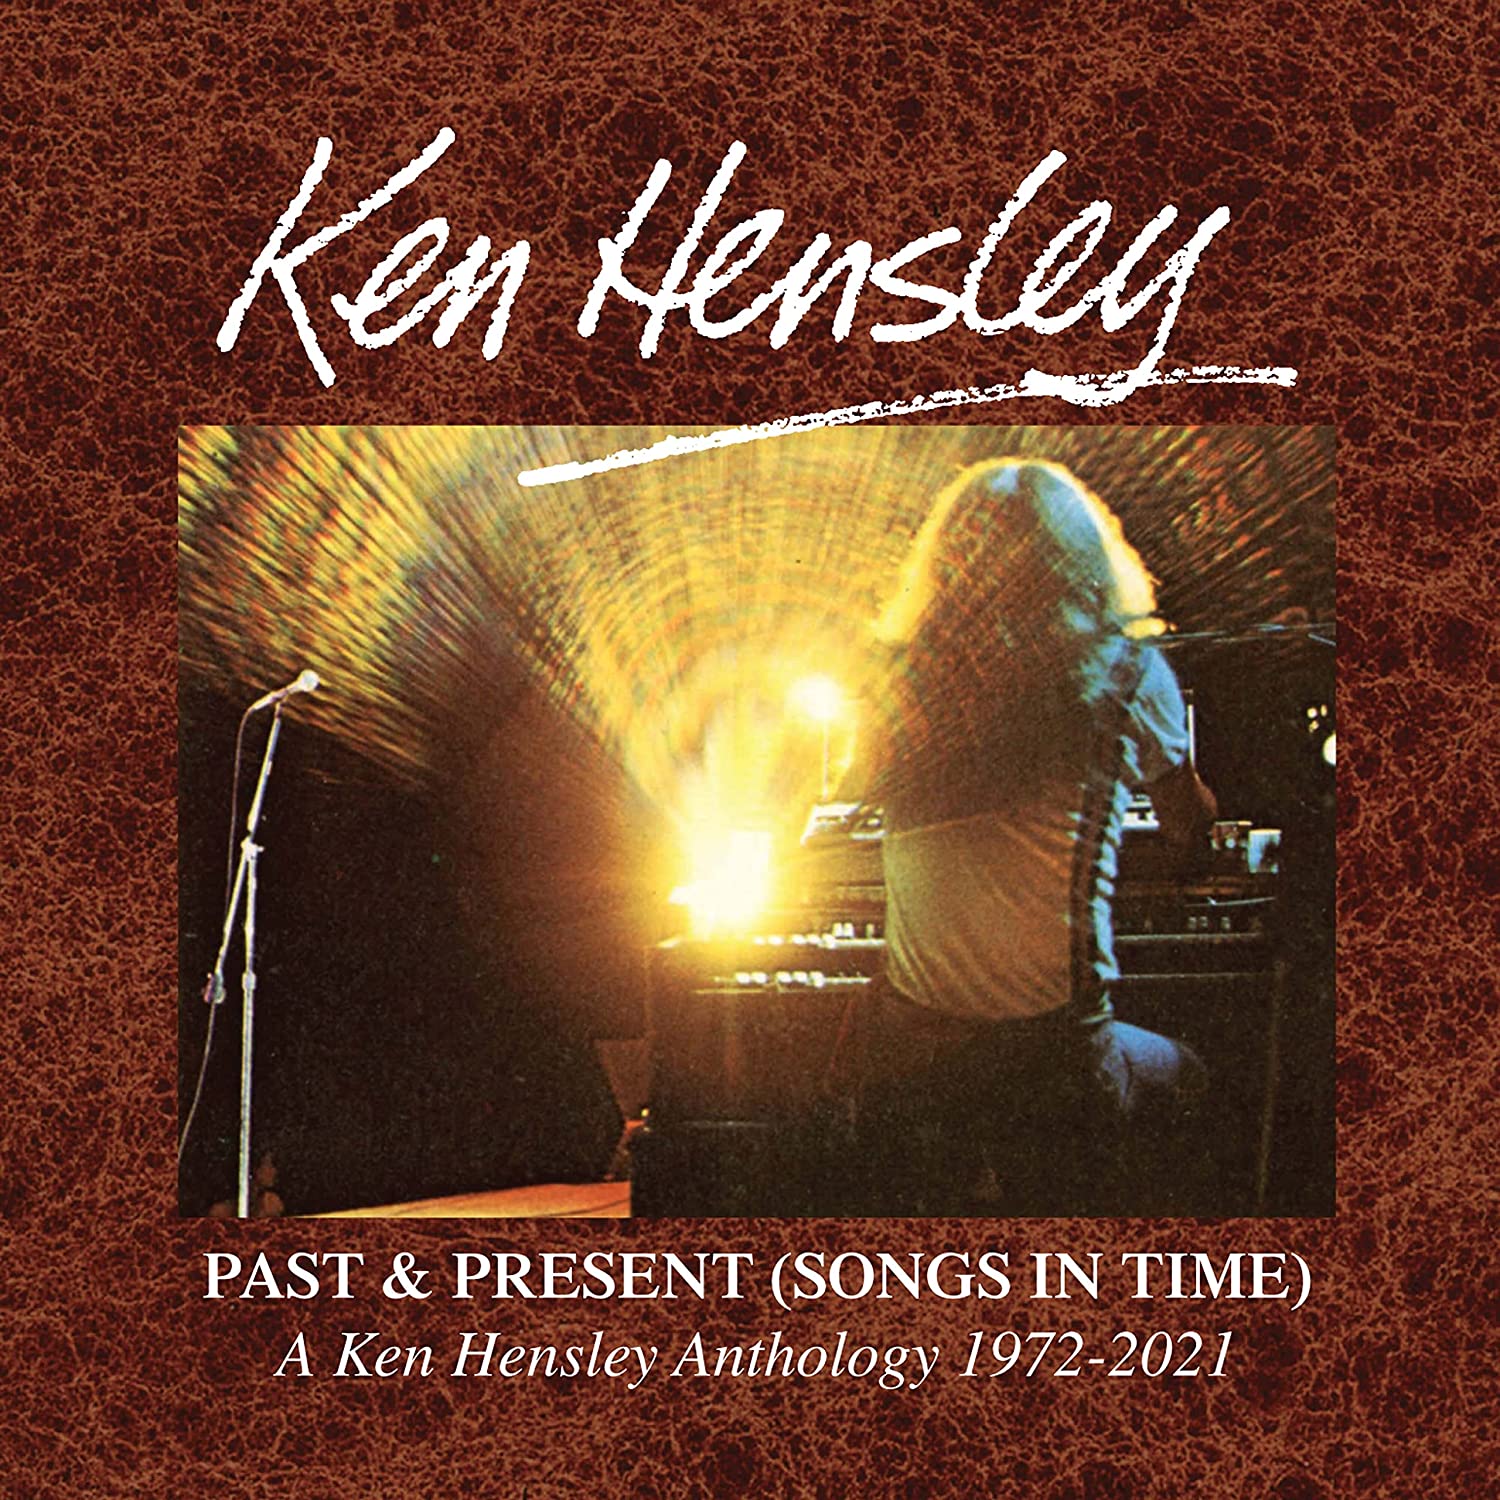 HENSLEY KEN - Past & Present (Songs In Time): Anthology 1972-2021